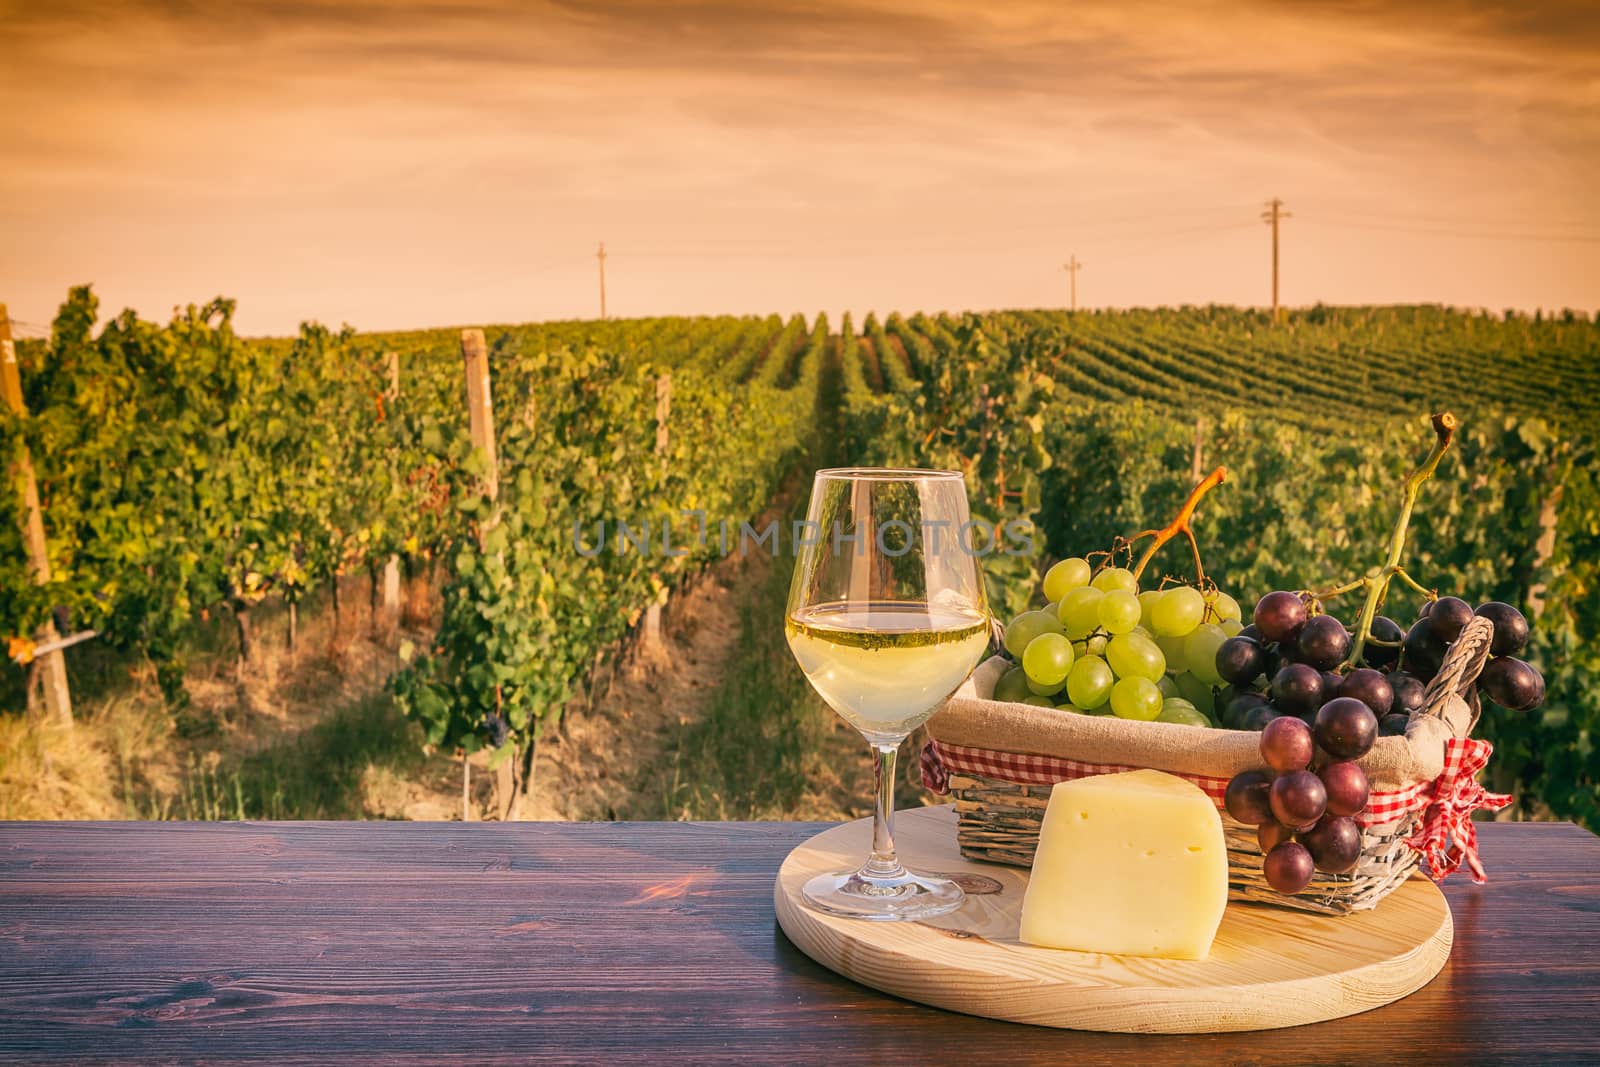 Glass of white wine with grapes in a basket and cheese in front of a vineyard at sunset